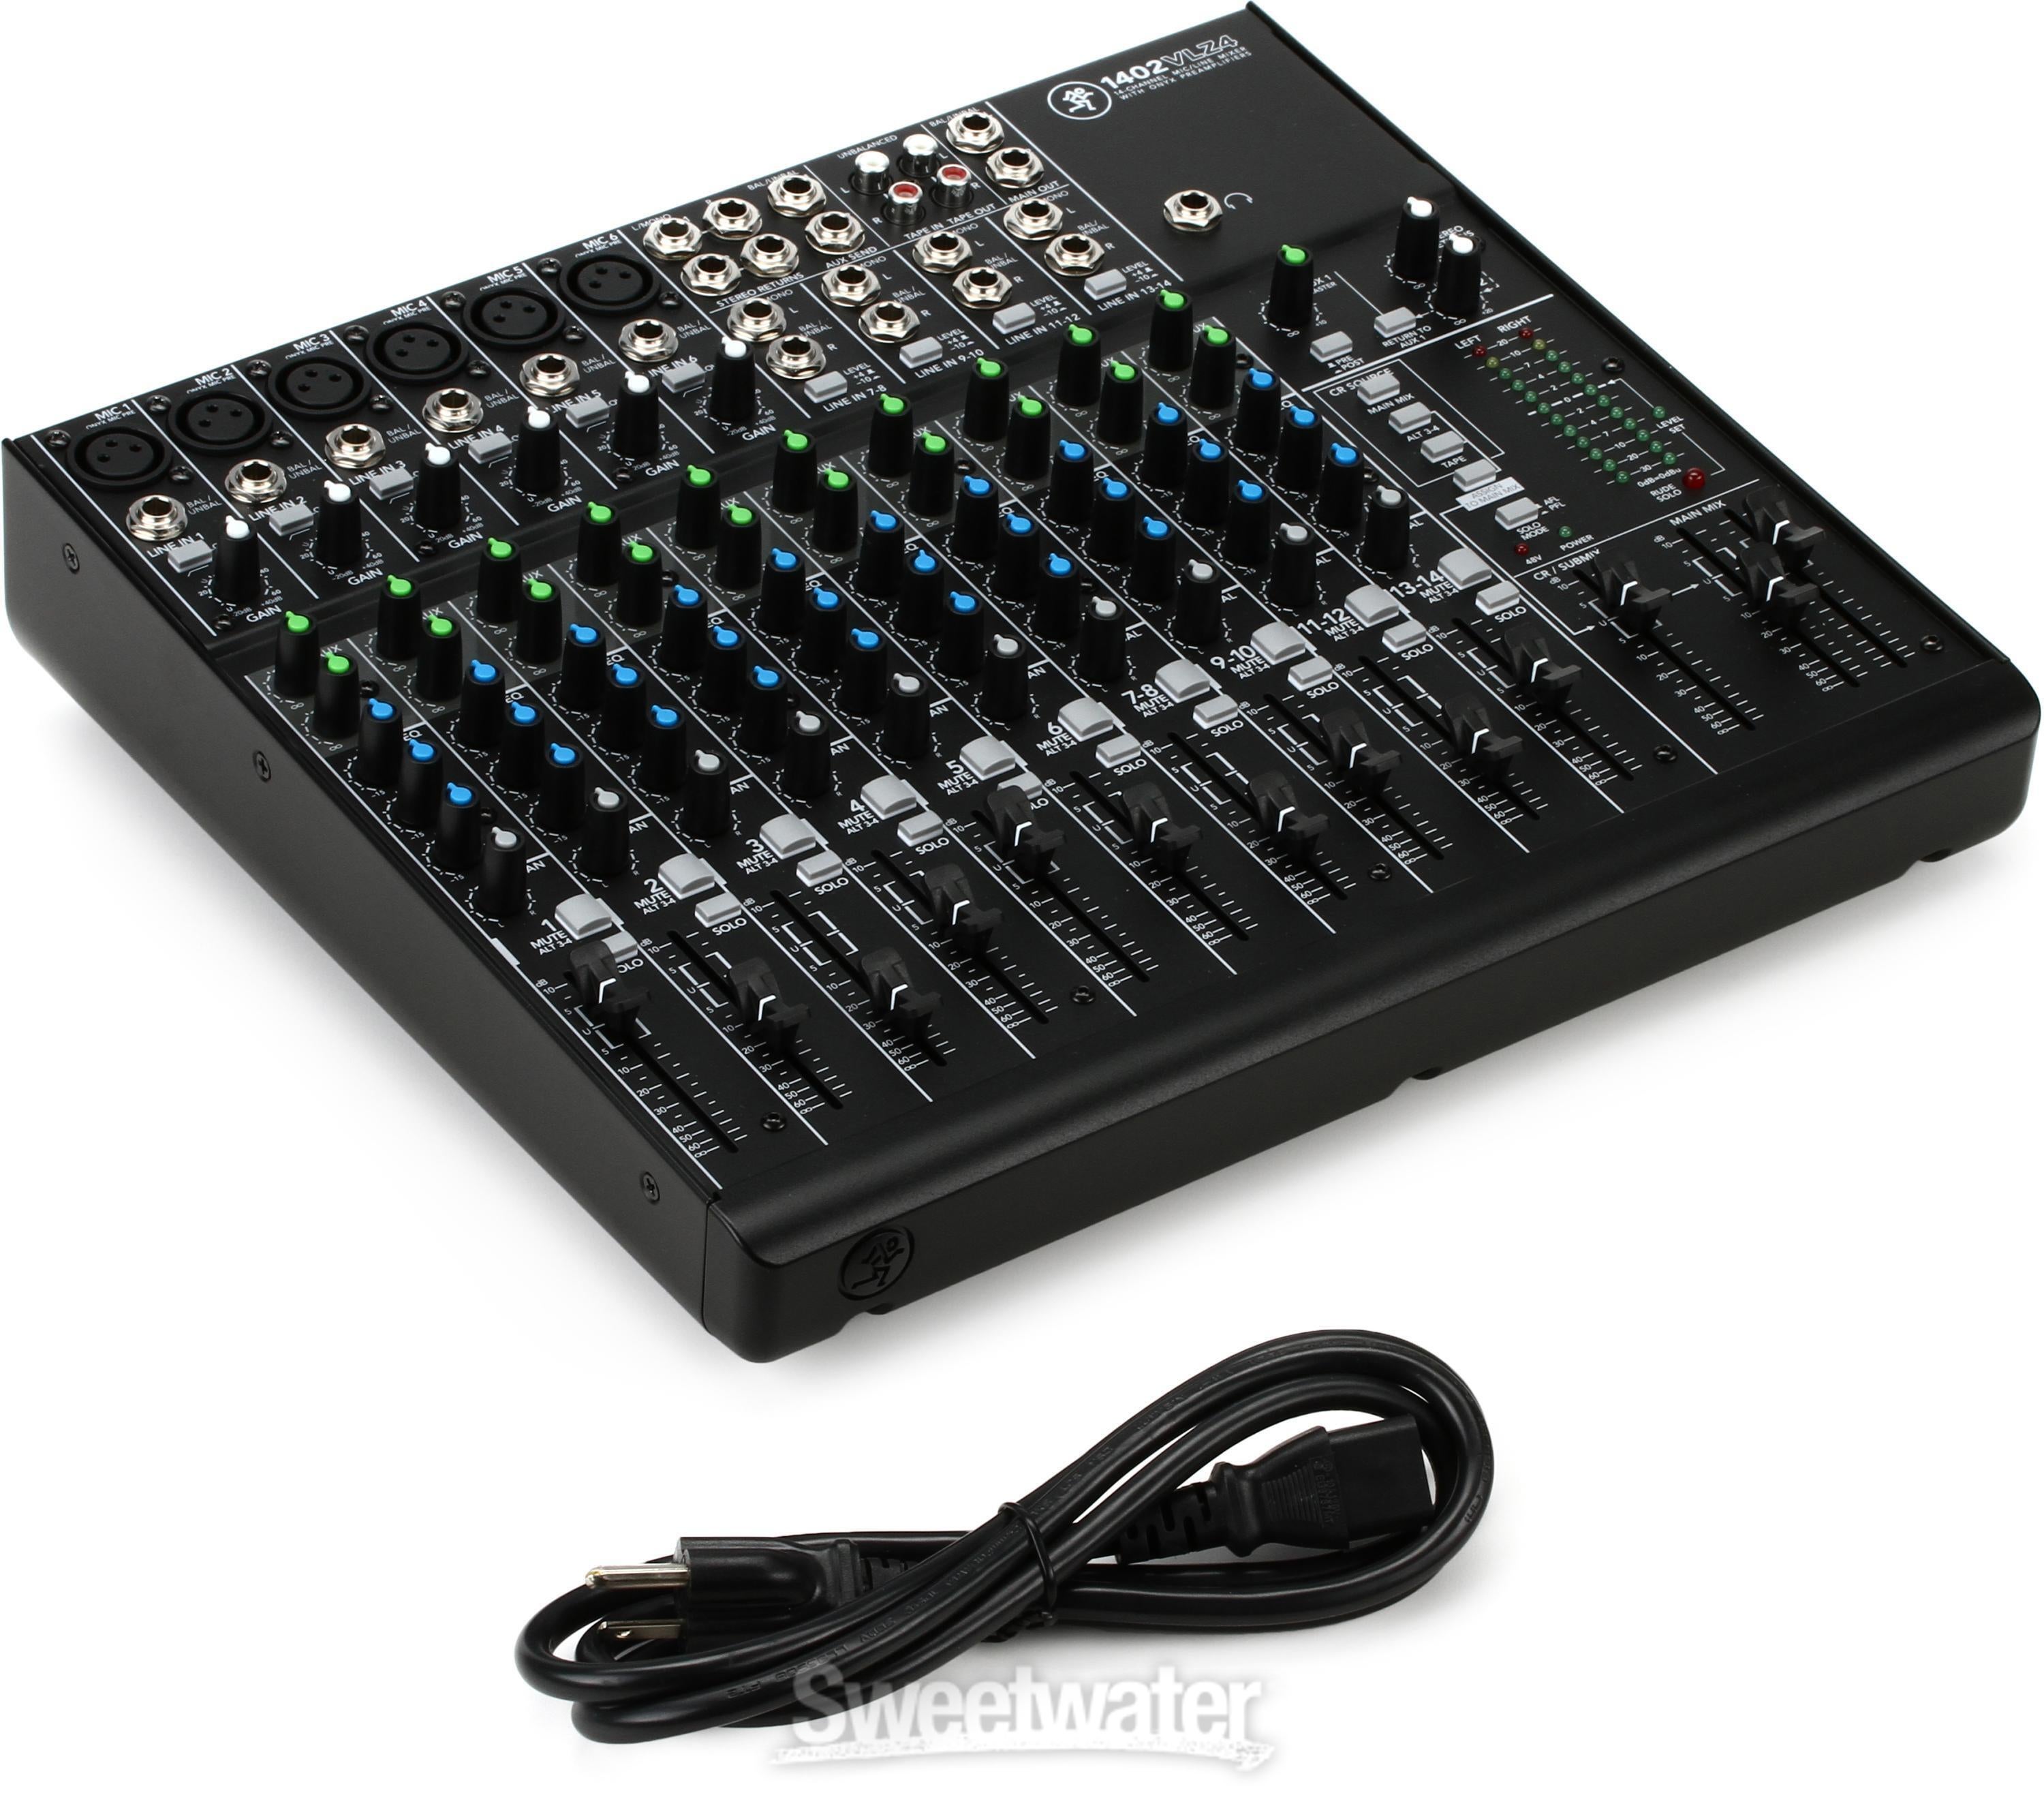 Mackie 1402VLZ4 14-channel Mixer | Sweetwater